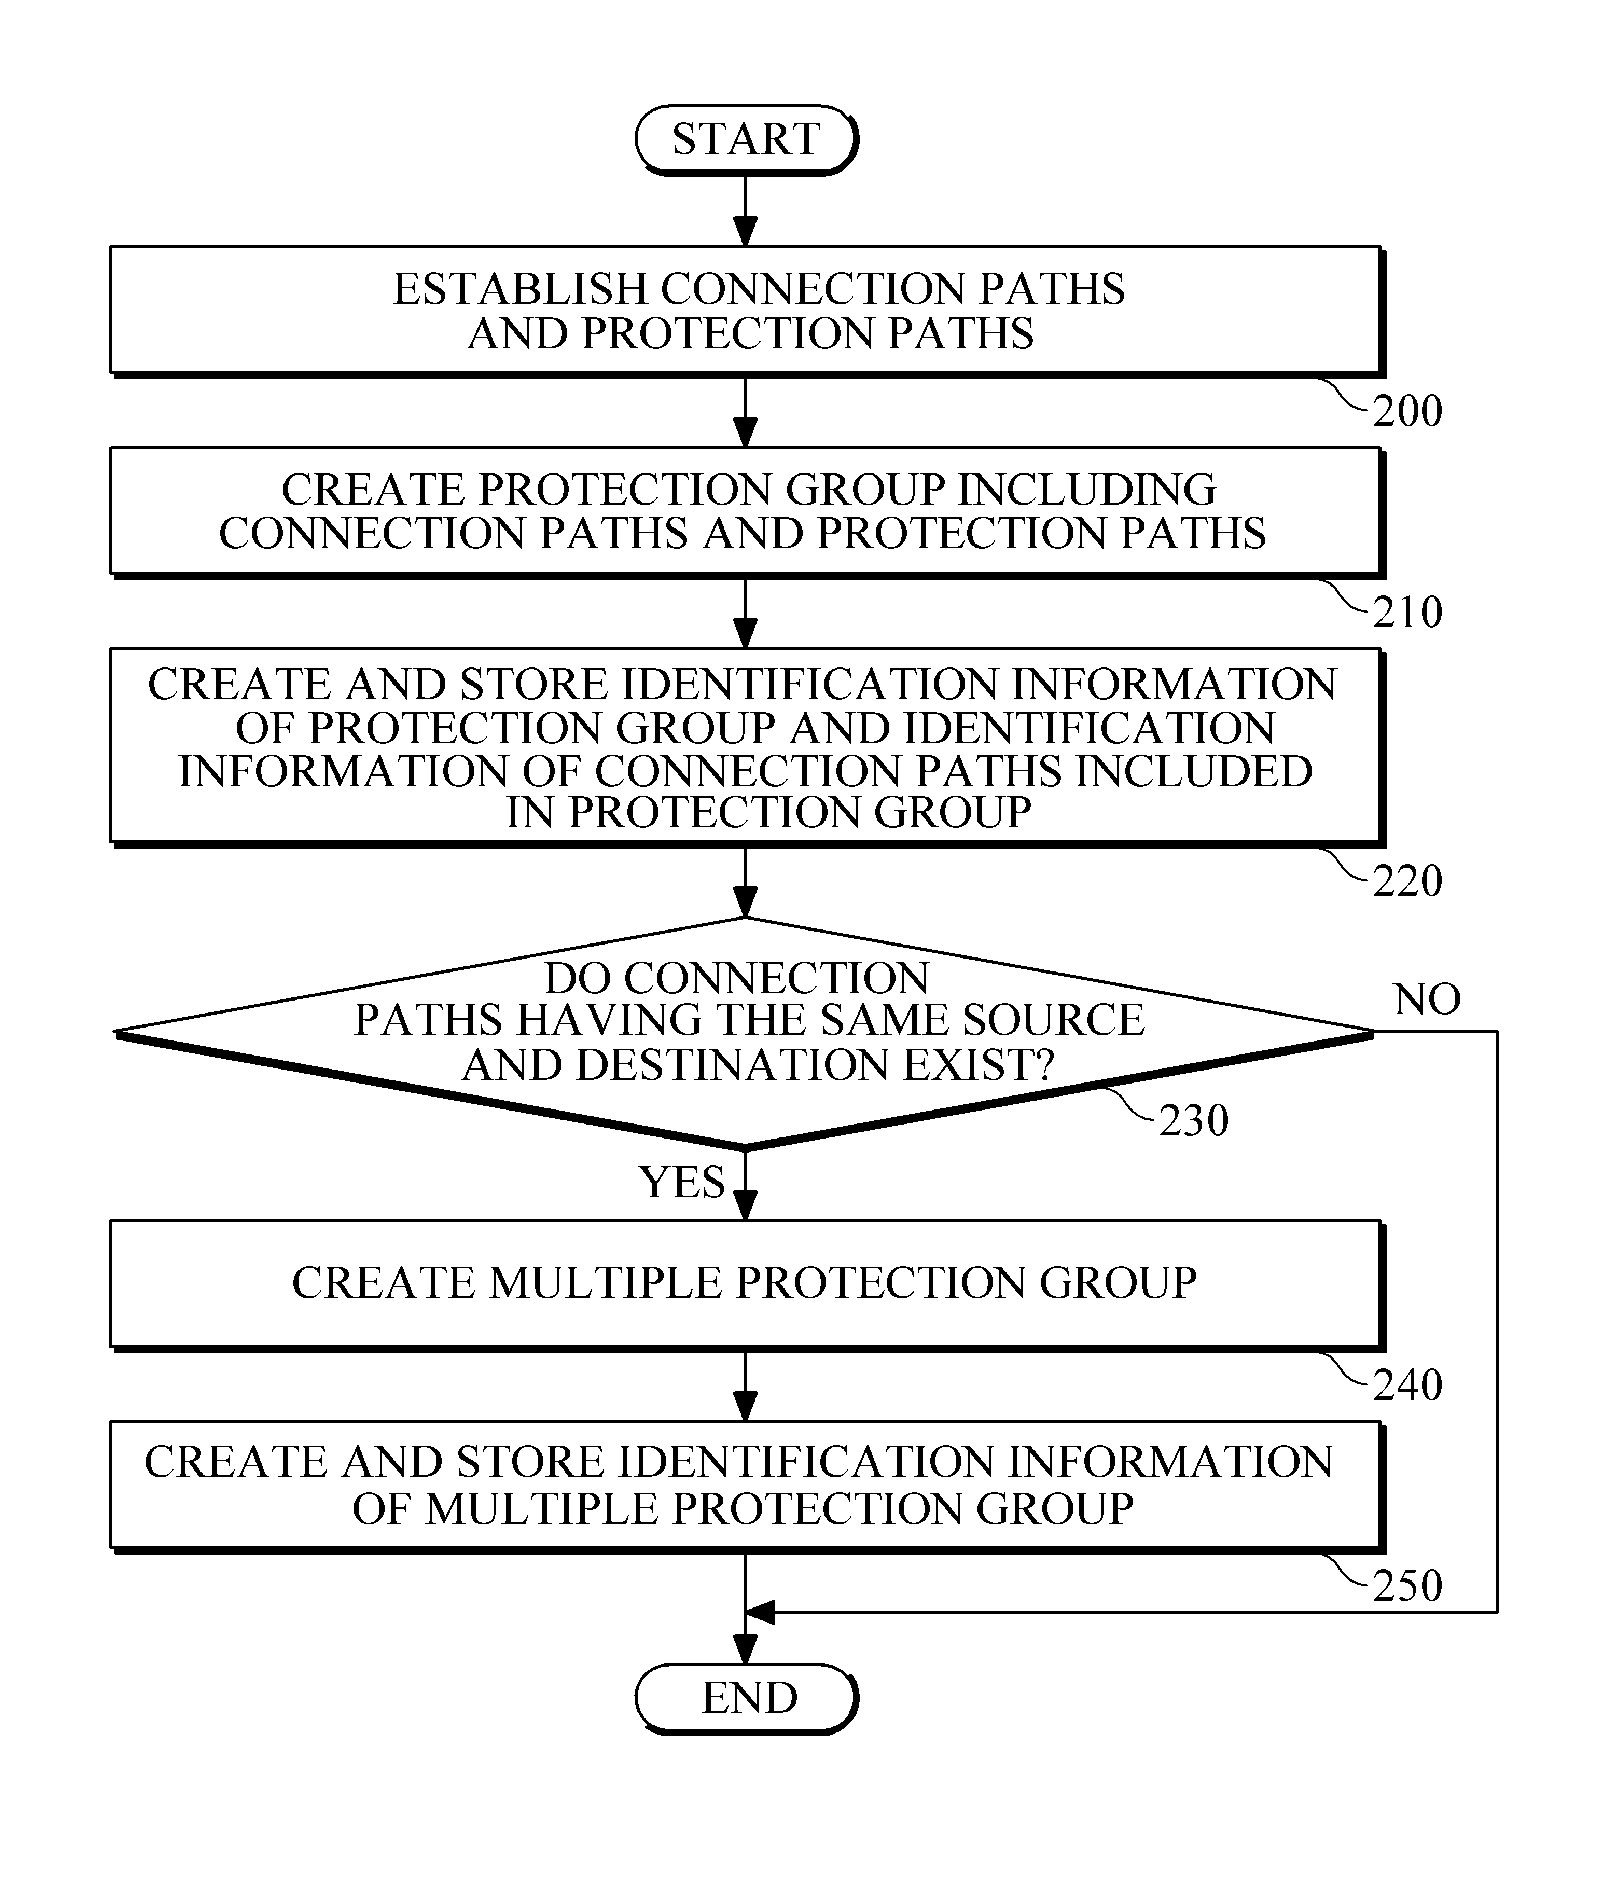 Apparatus and method for protection switching of multiple protection group